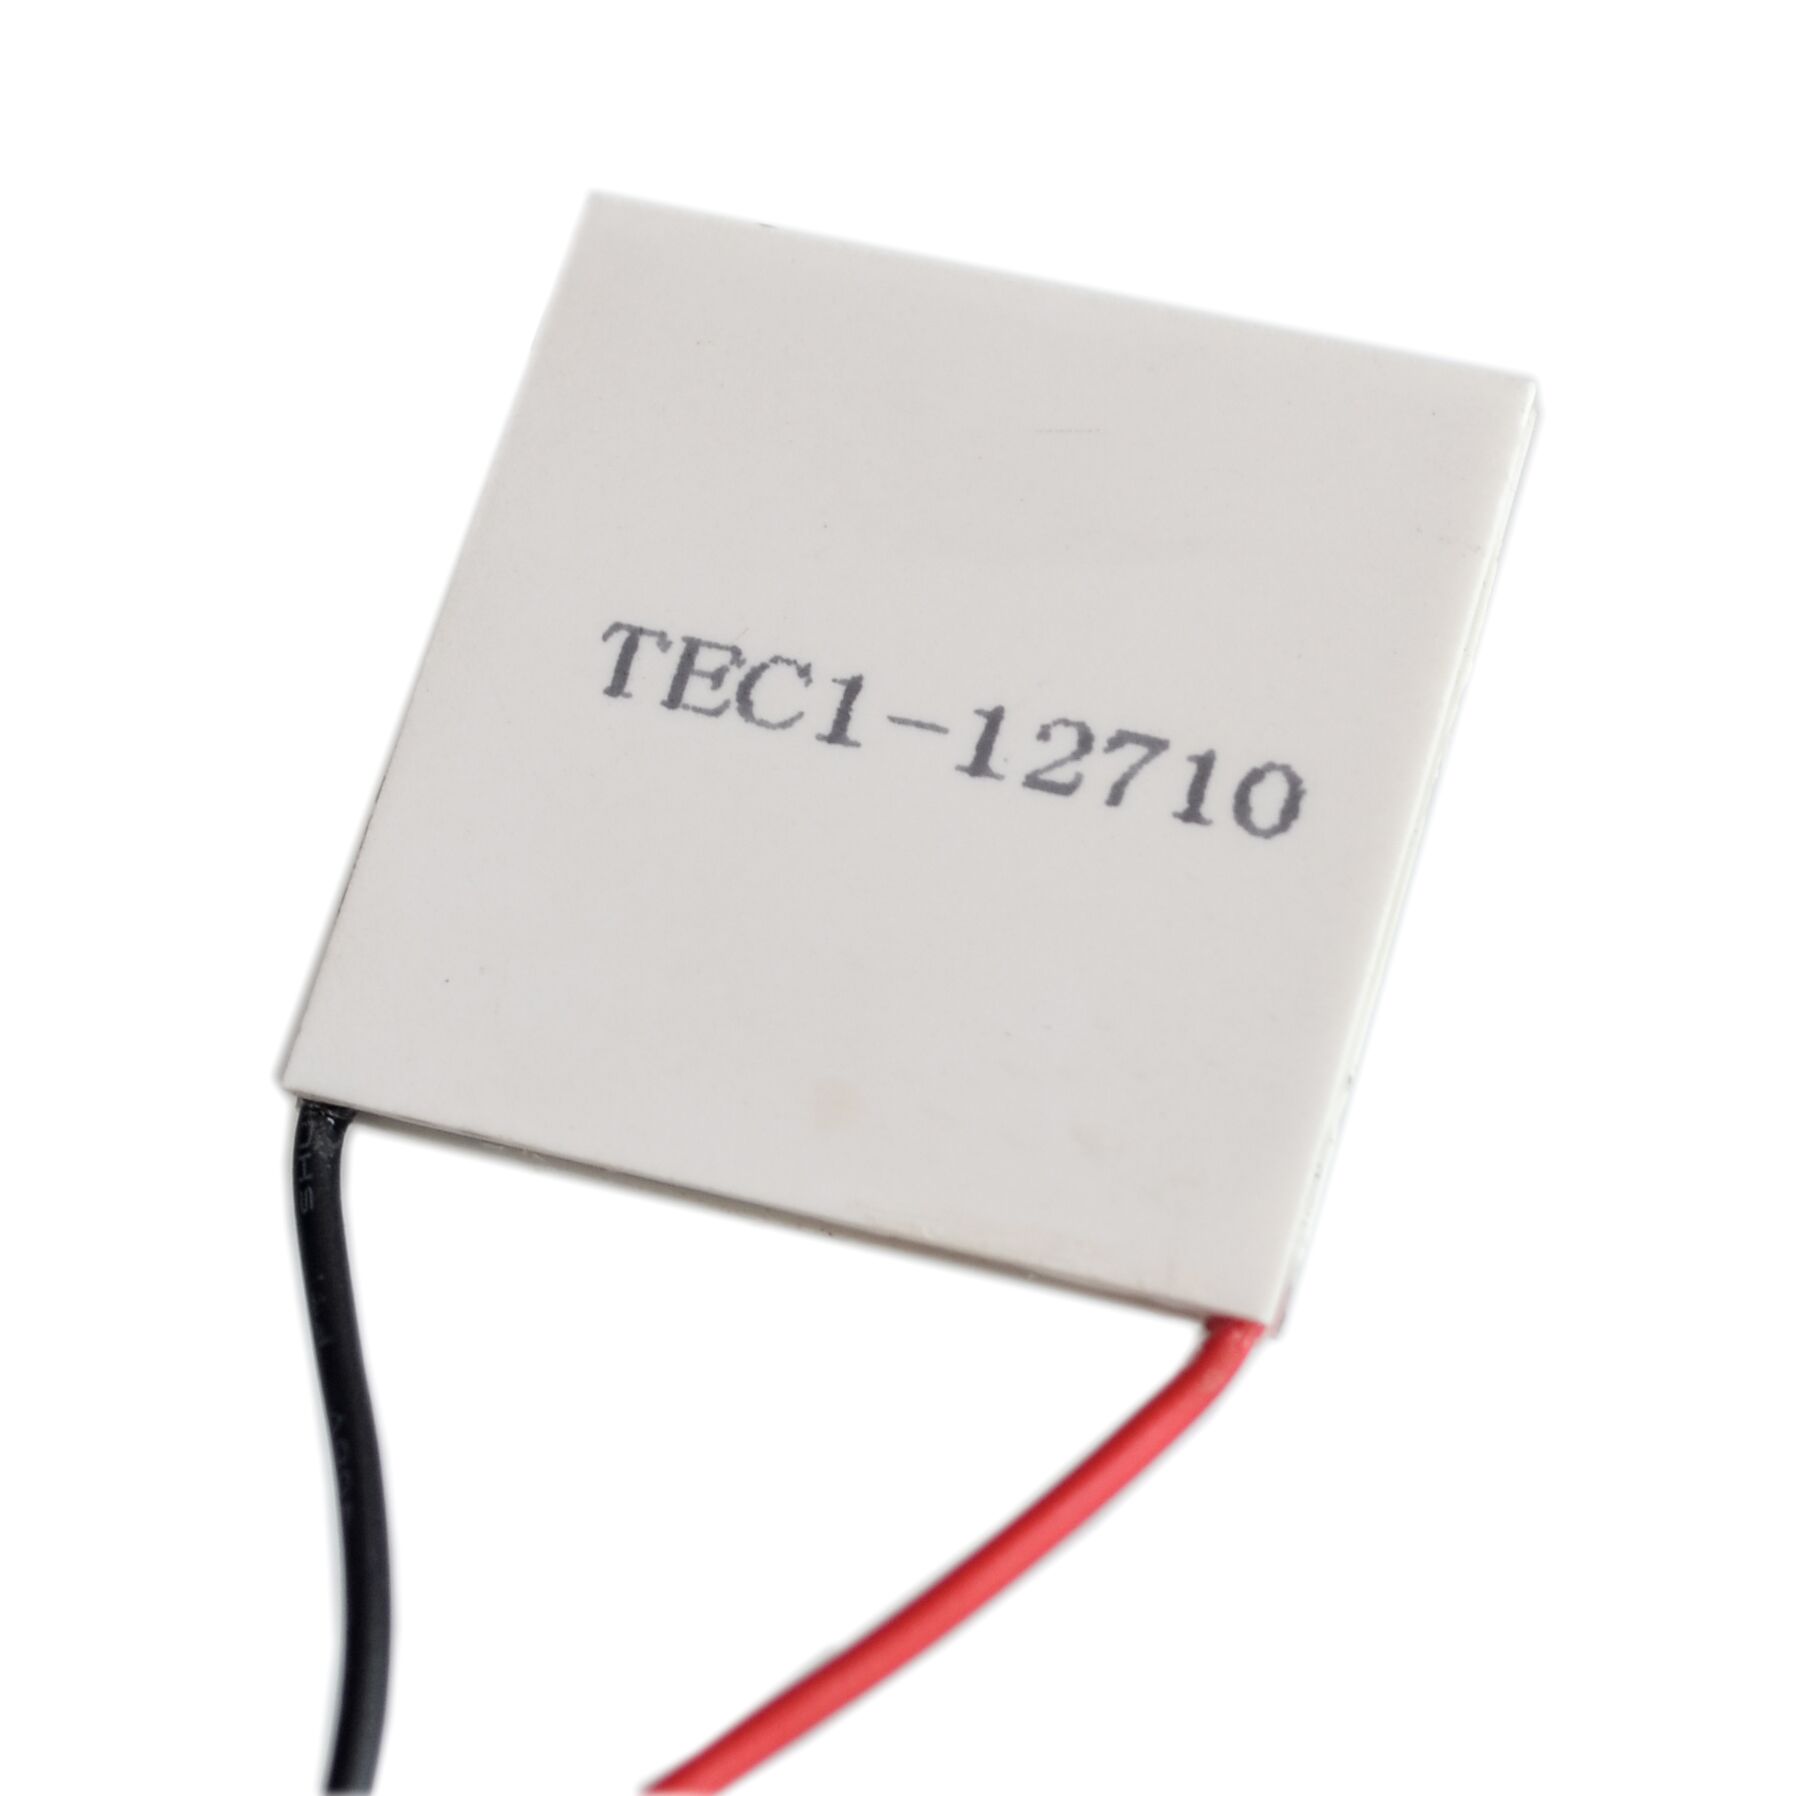 Details about   TEC1-12710 Heatsink Thermoelectric Cooler Cooling Peltier Plate Module 